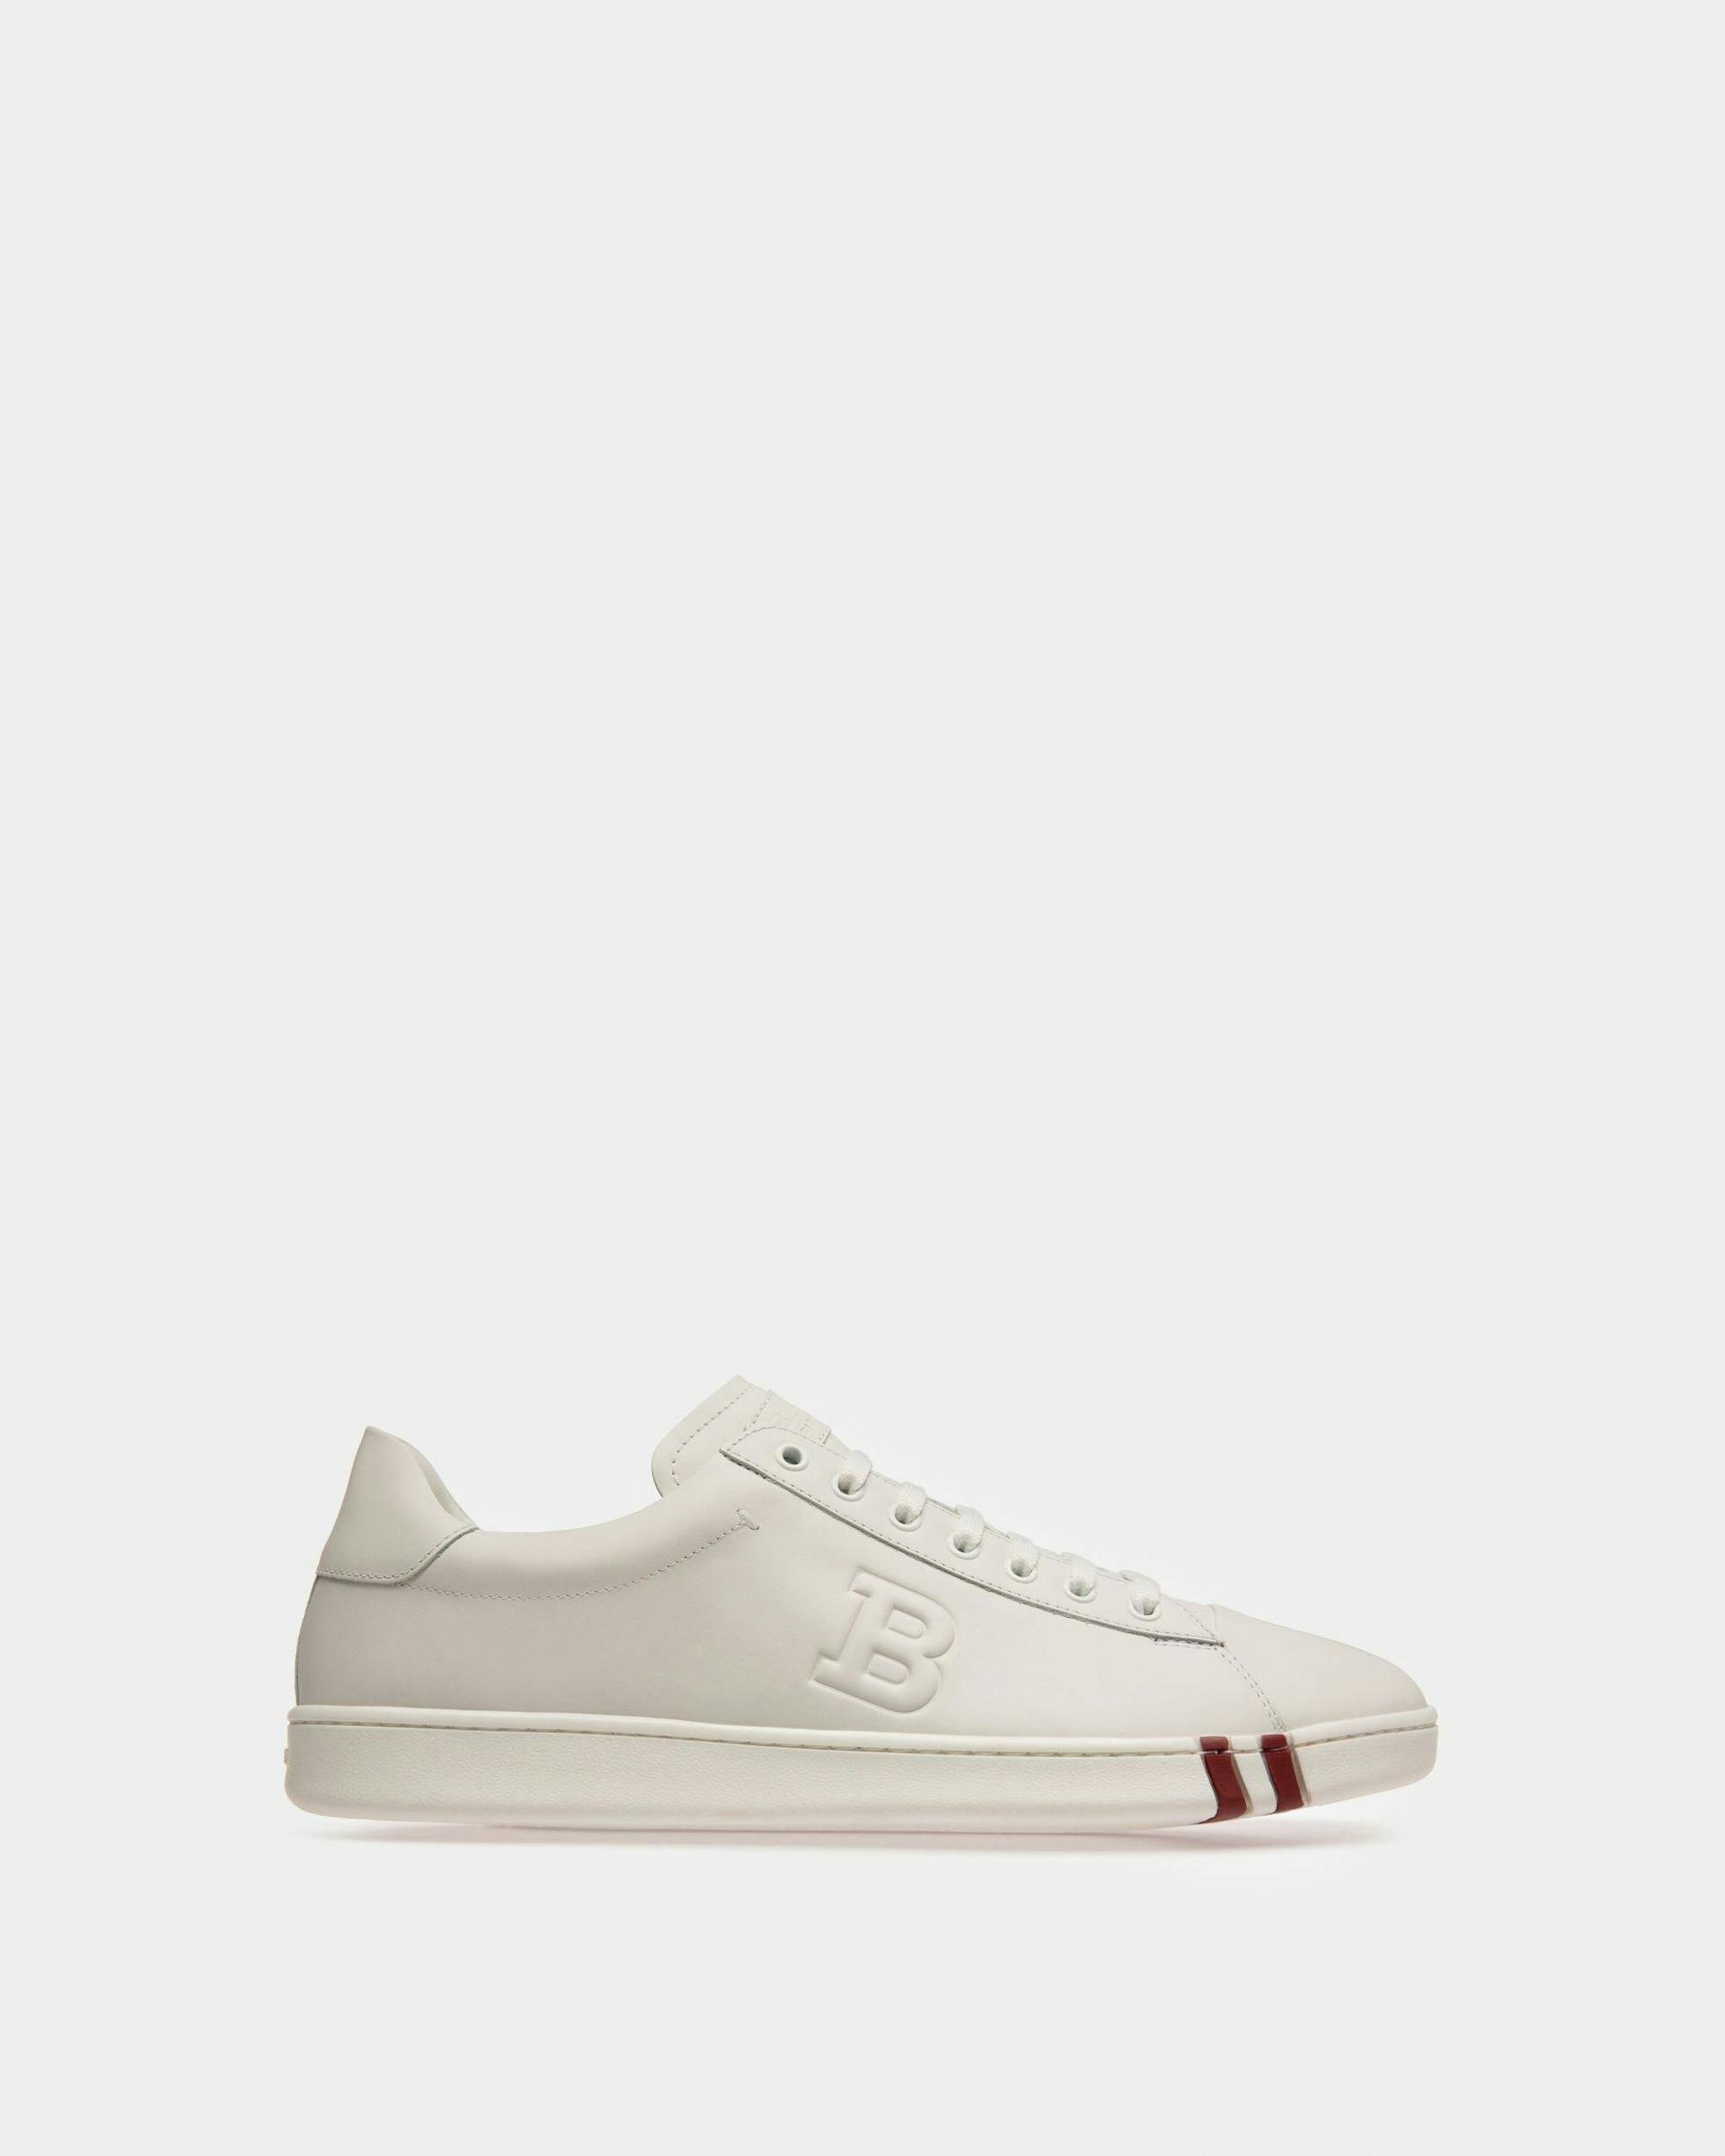 Asher Leather Sneakers In White - Men's - Bally - 01